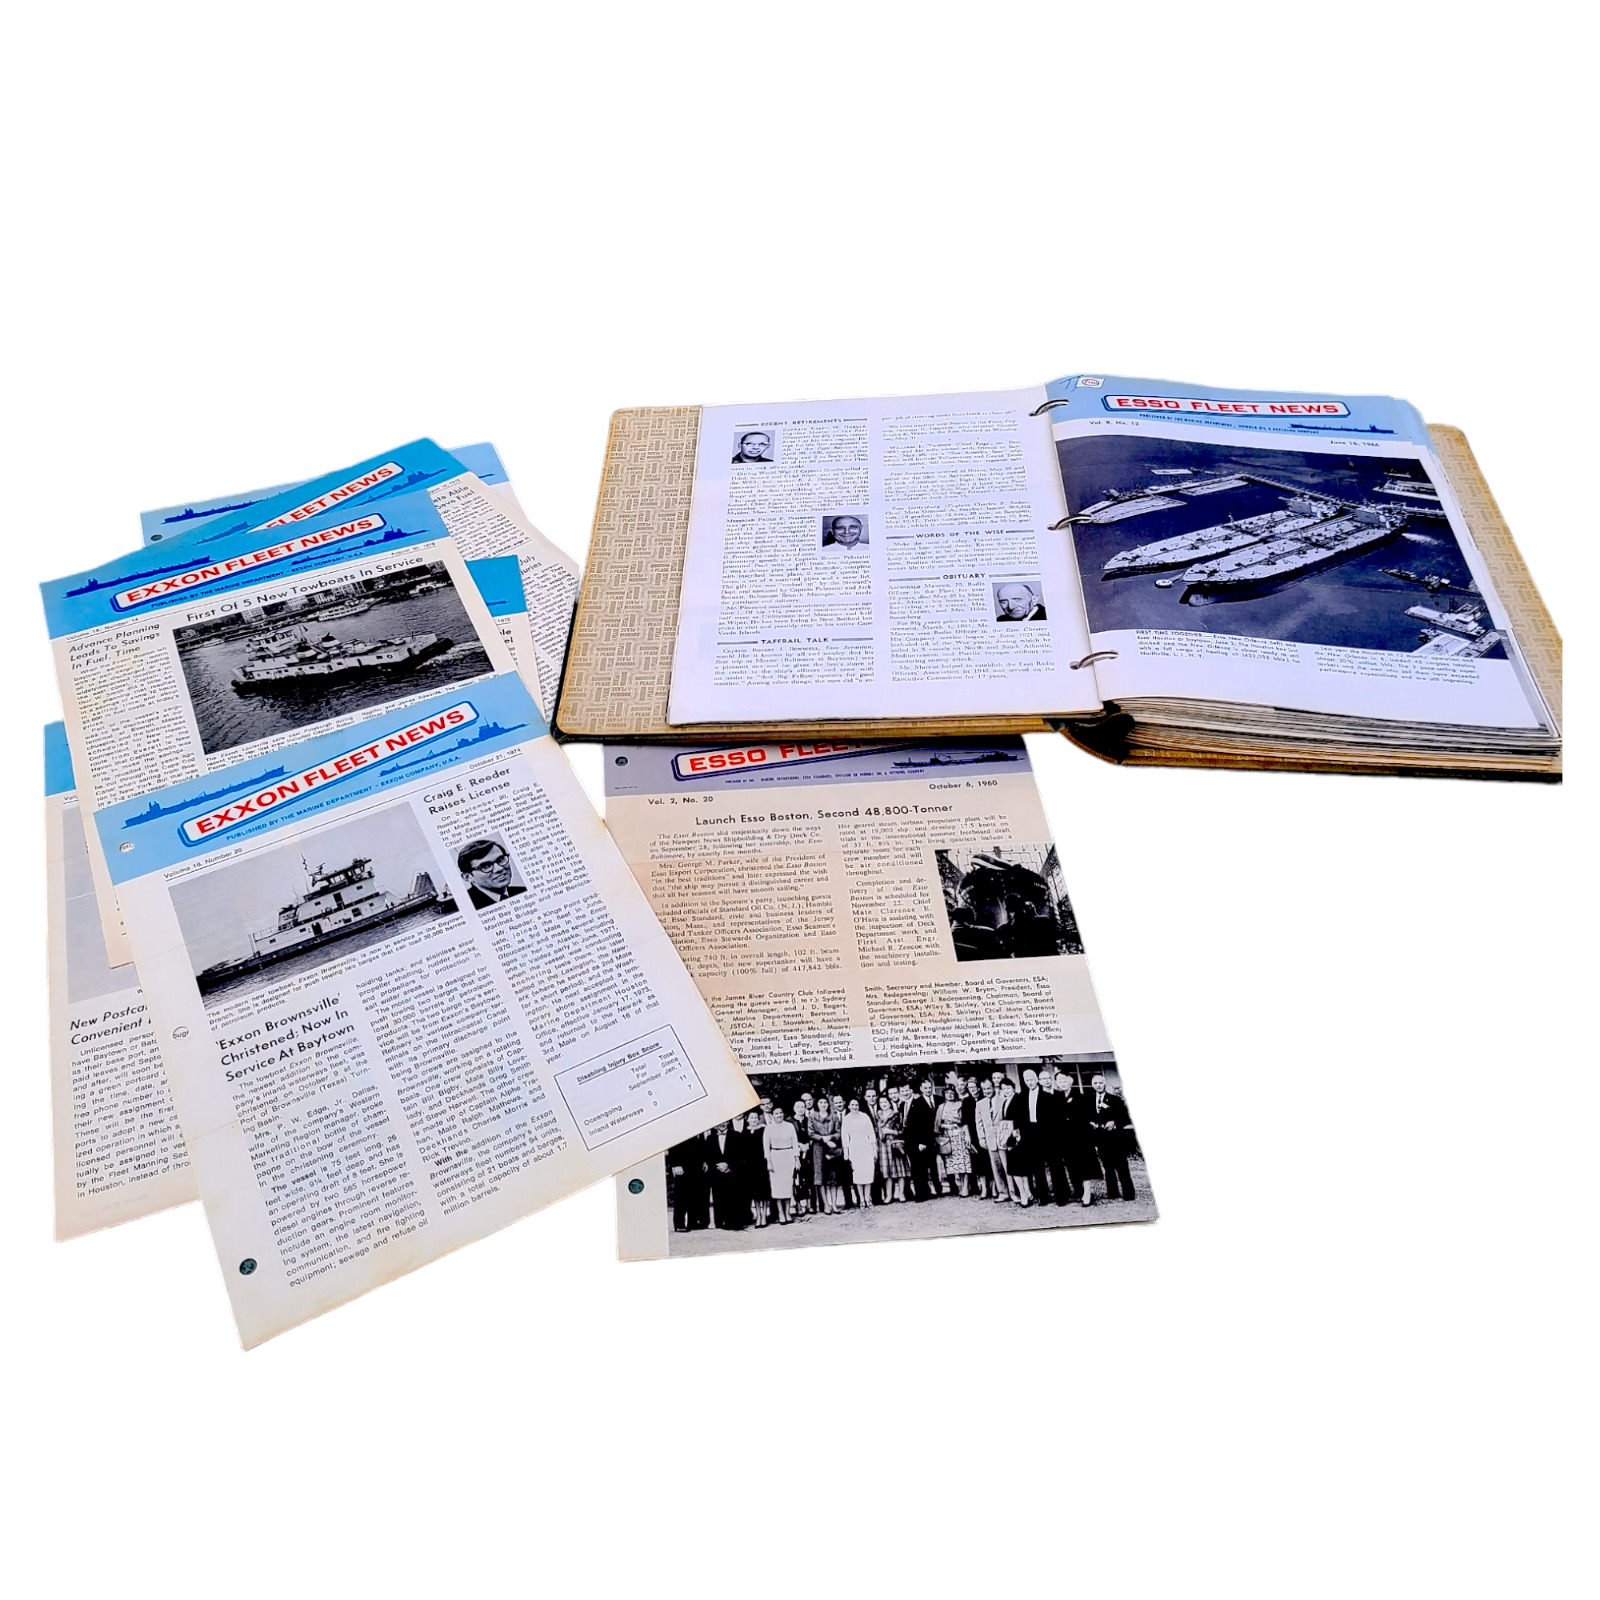 RARE 1960s ESSO Fleet News Photo Newsletter About Ships Tankers Over 100 Issues